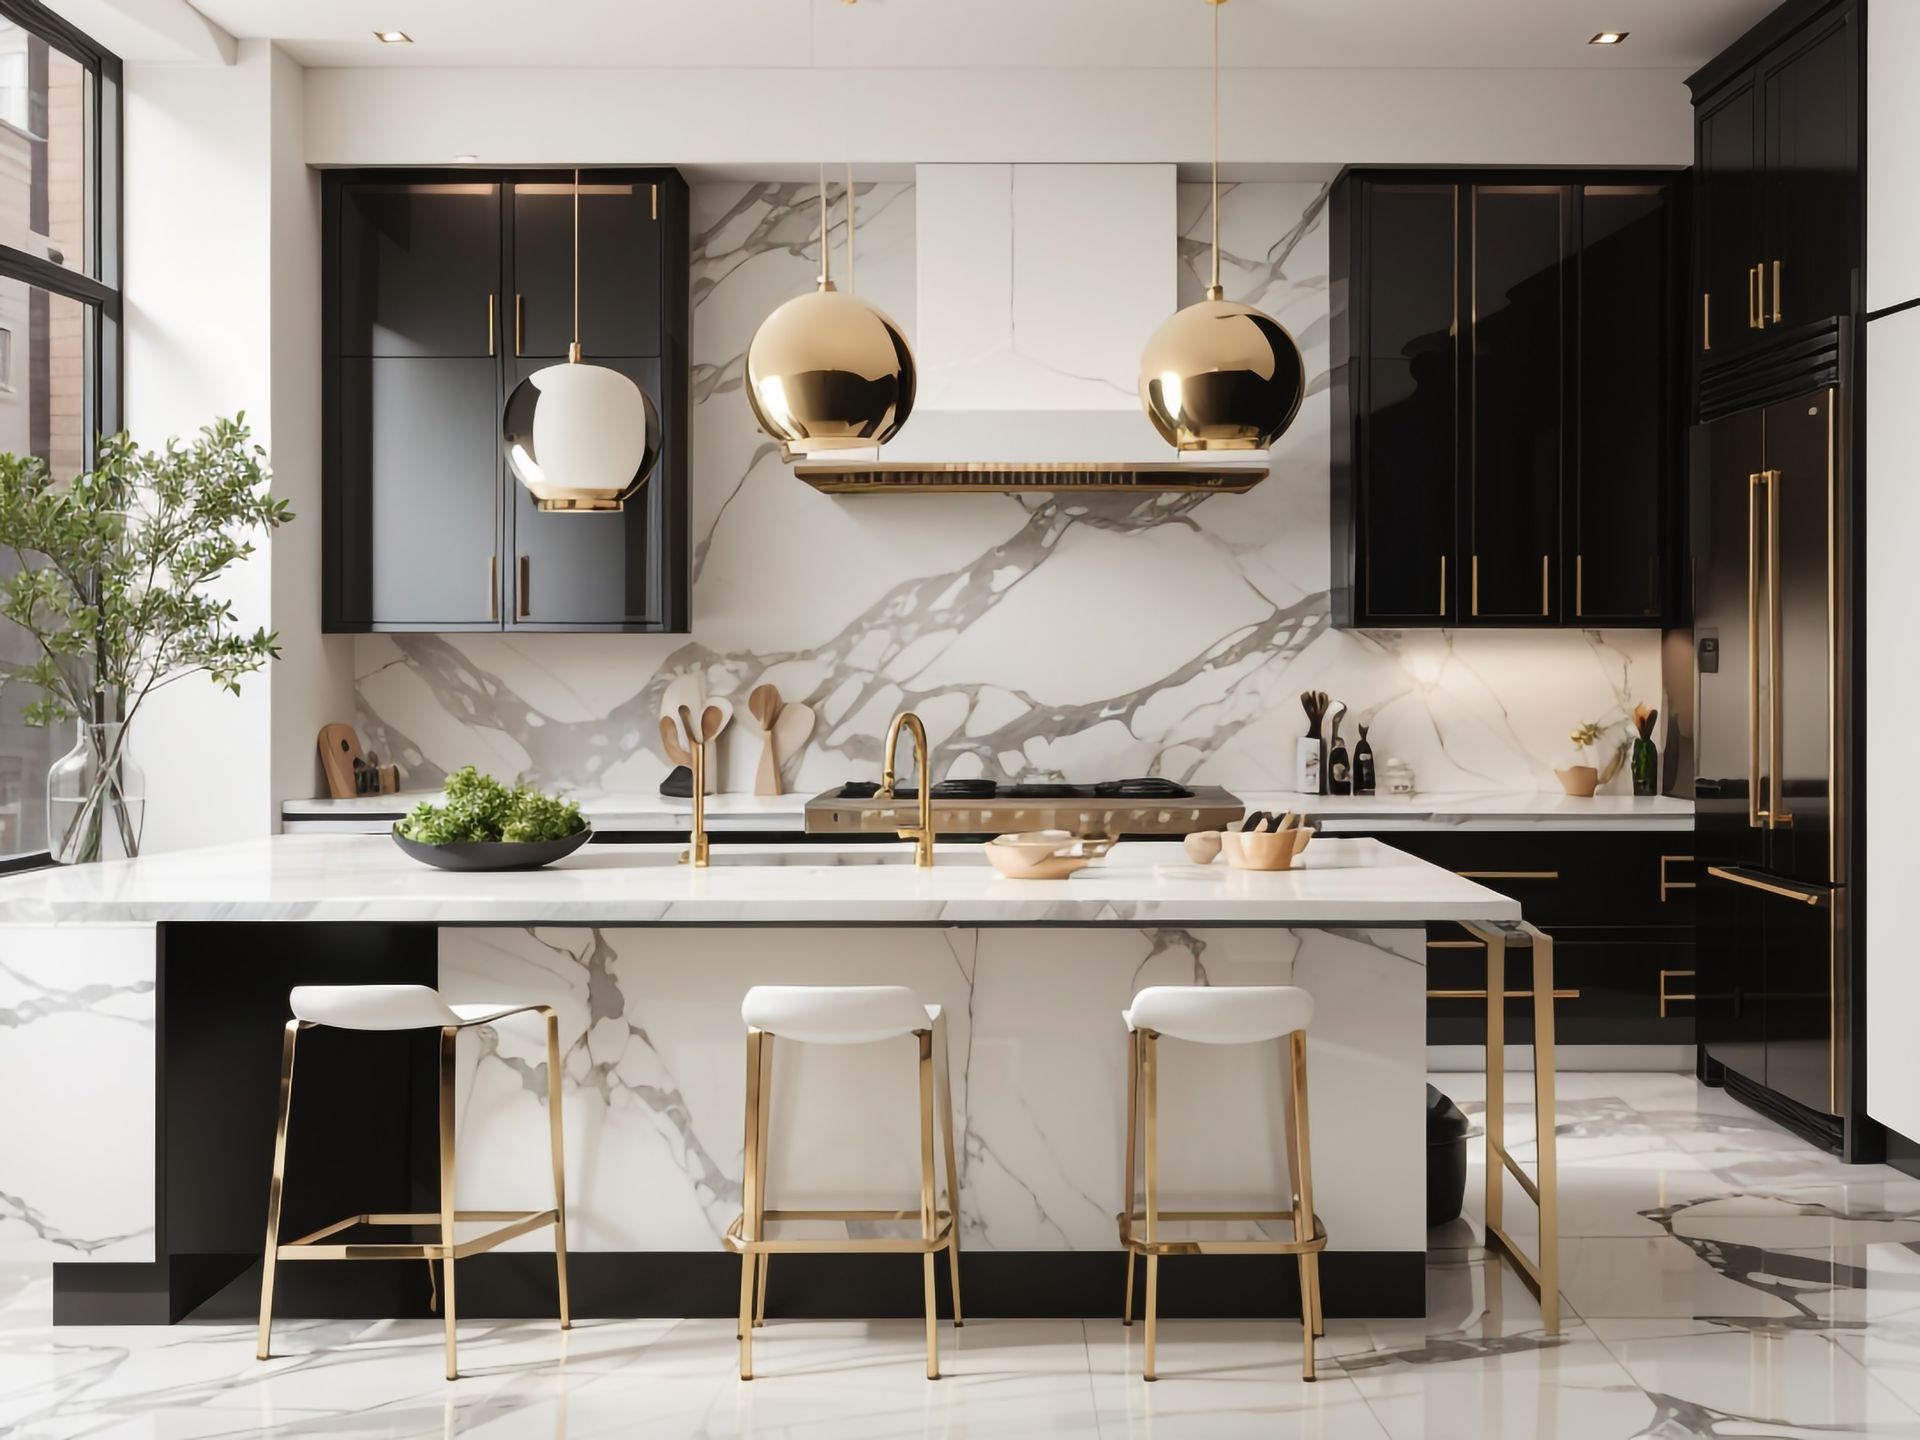 A modern kitchen with black and white cabinets, marble counter tops, and gold stools.